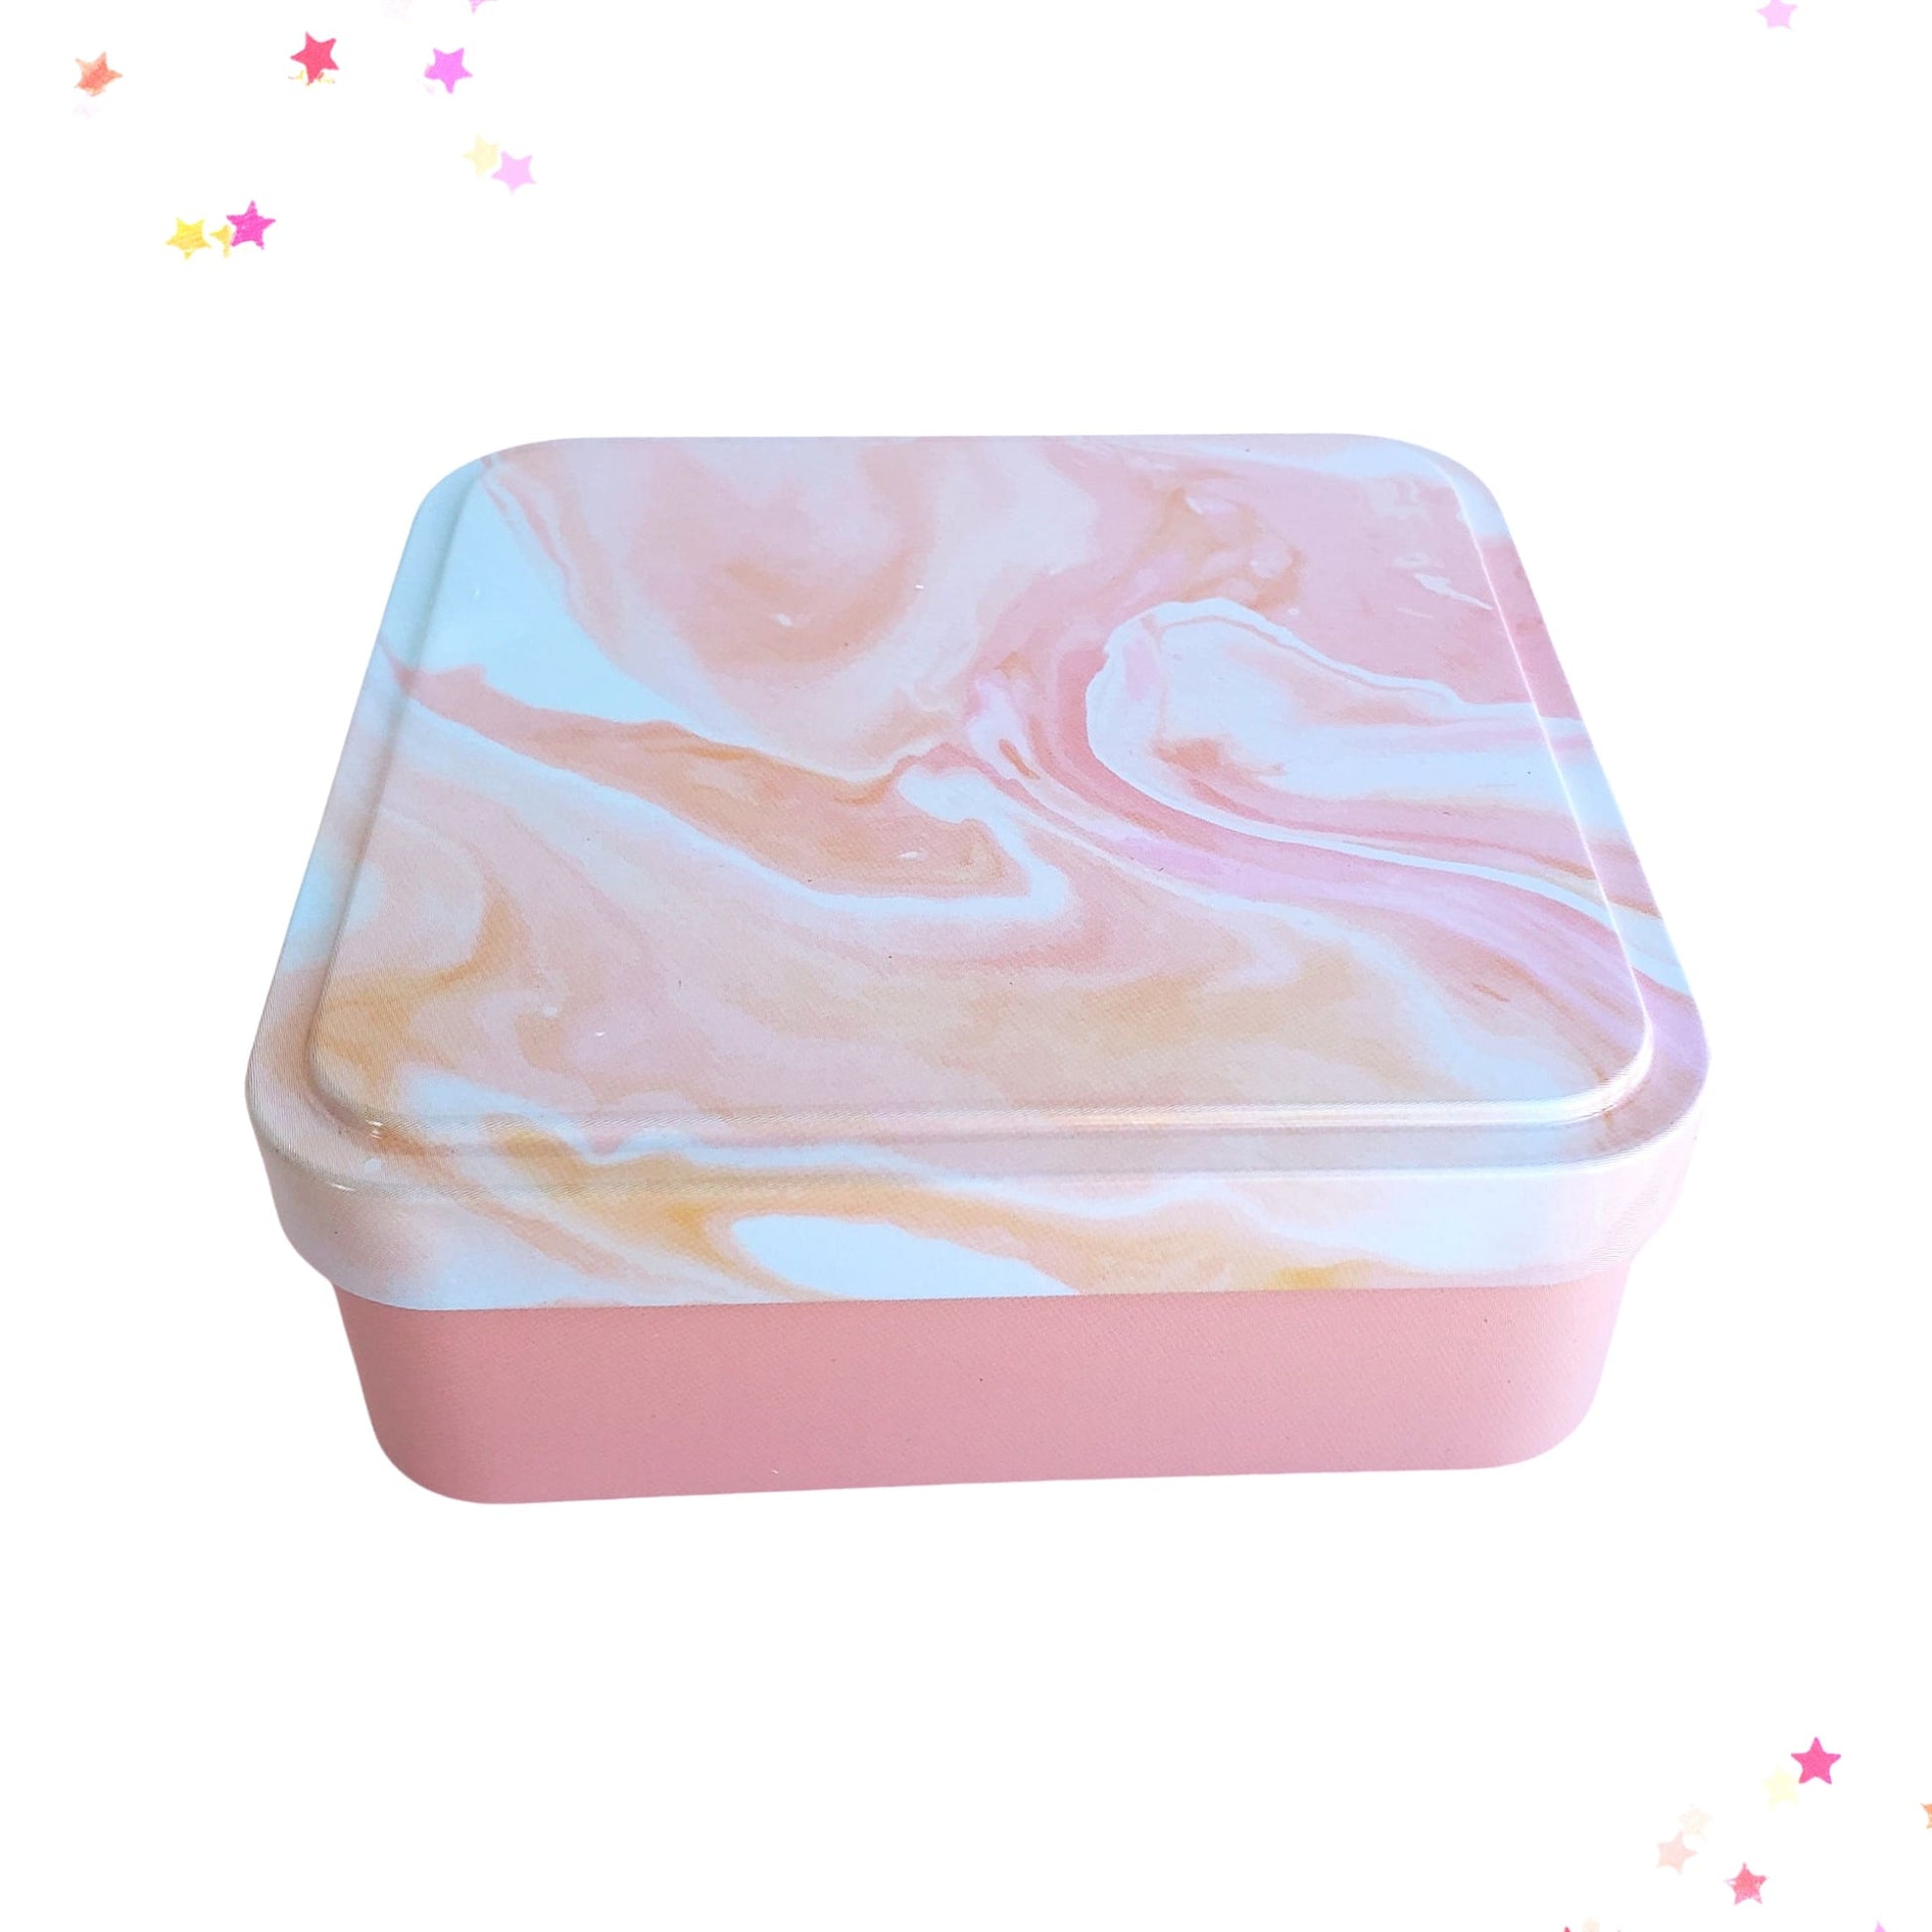 Peachy Pink Swirl Tin Storage Box from Confetti Kitty, Only 3.99